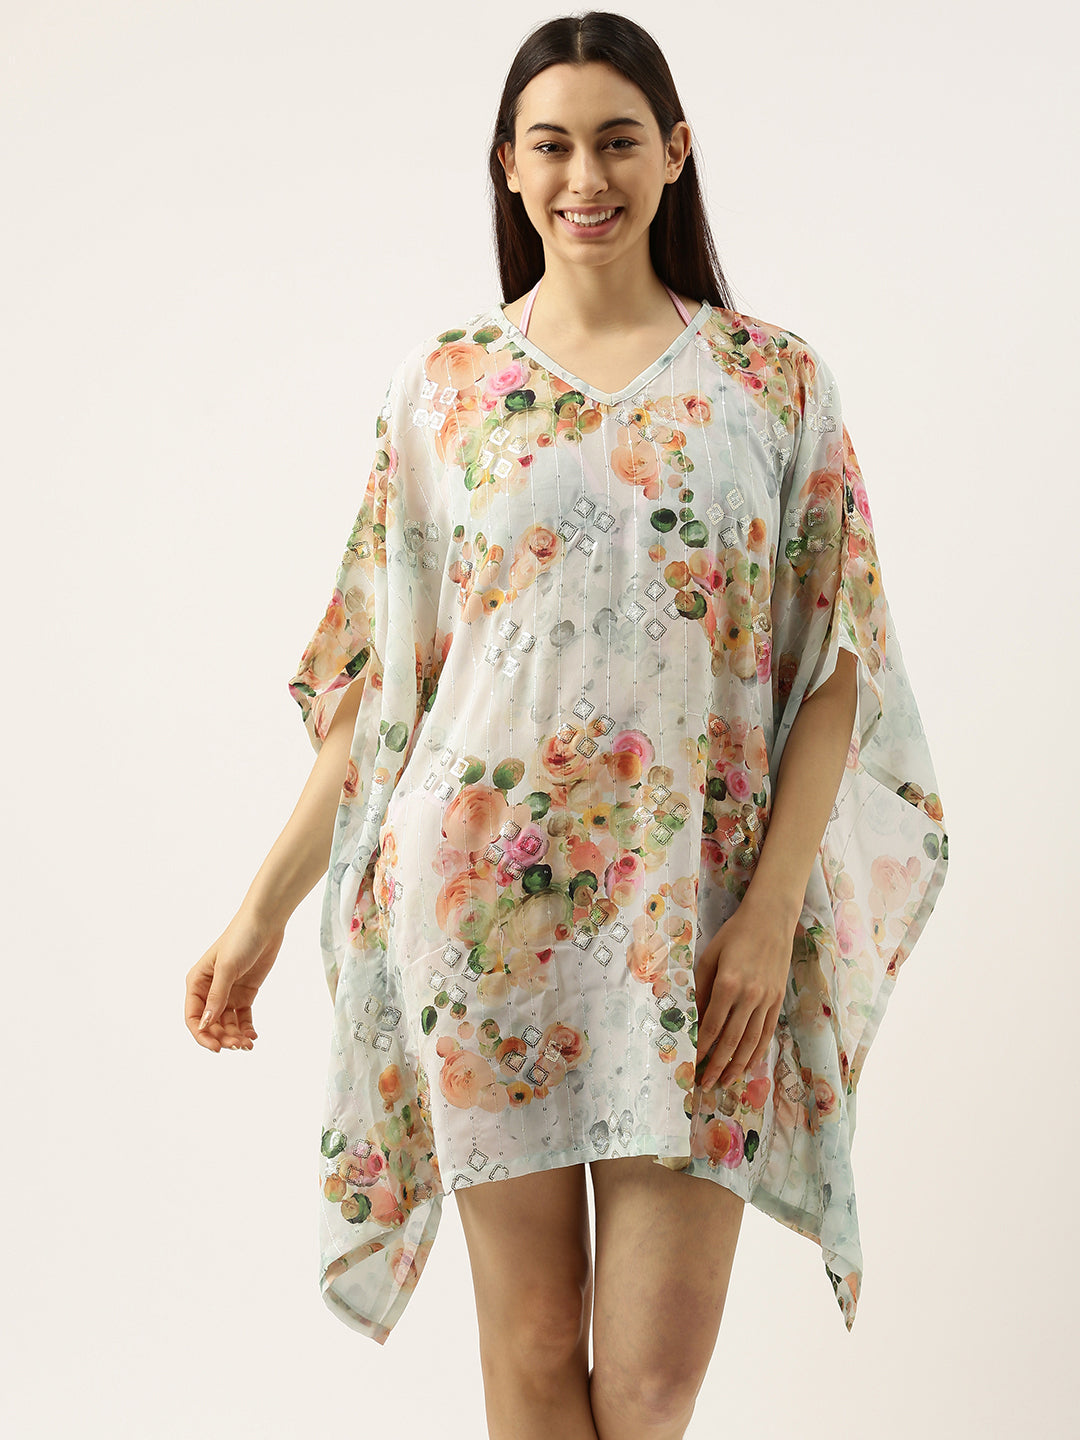 S83 Women Printed Beach Cover Up - Clt.s